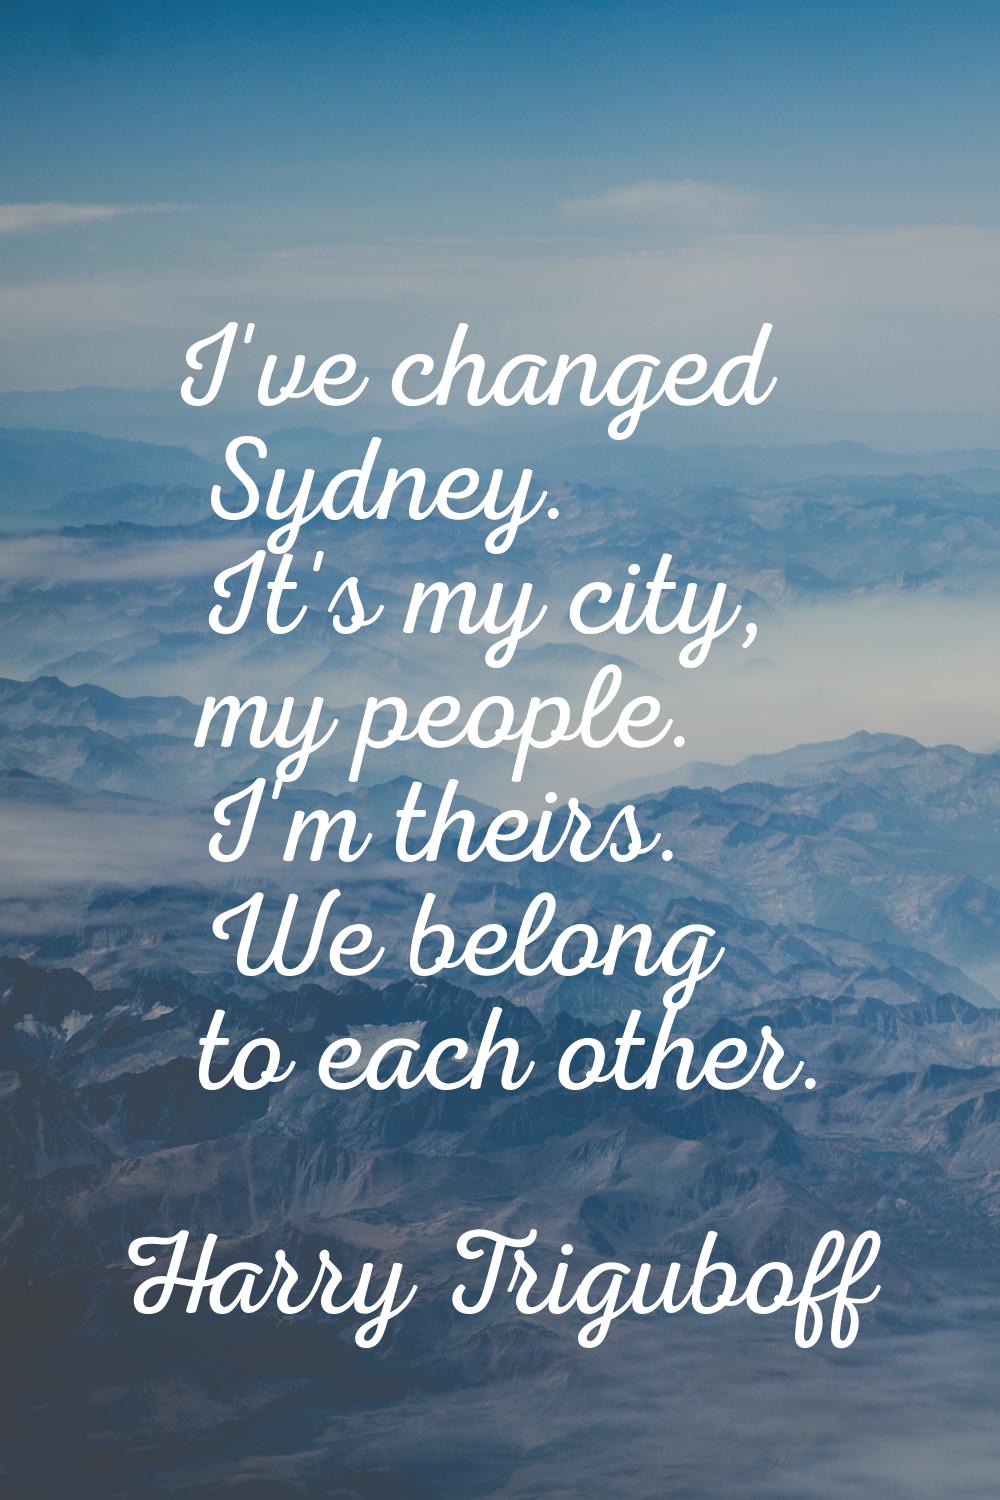 I've changed Sydney. It's my city, my people. I'm theirs. We belong to each other.